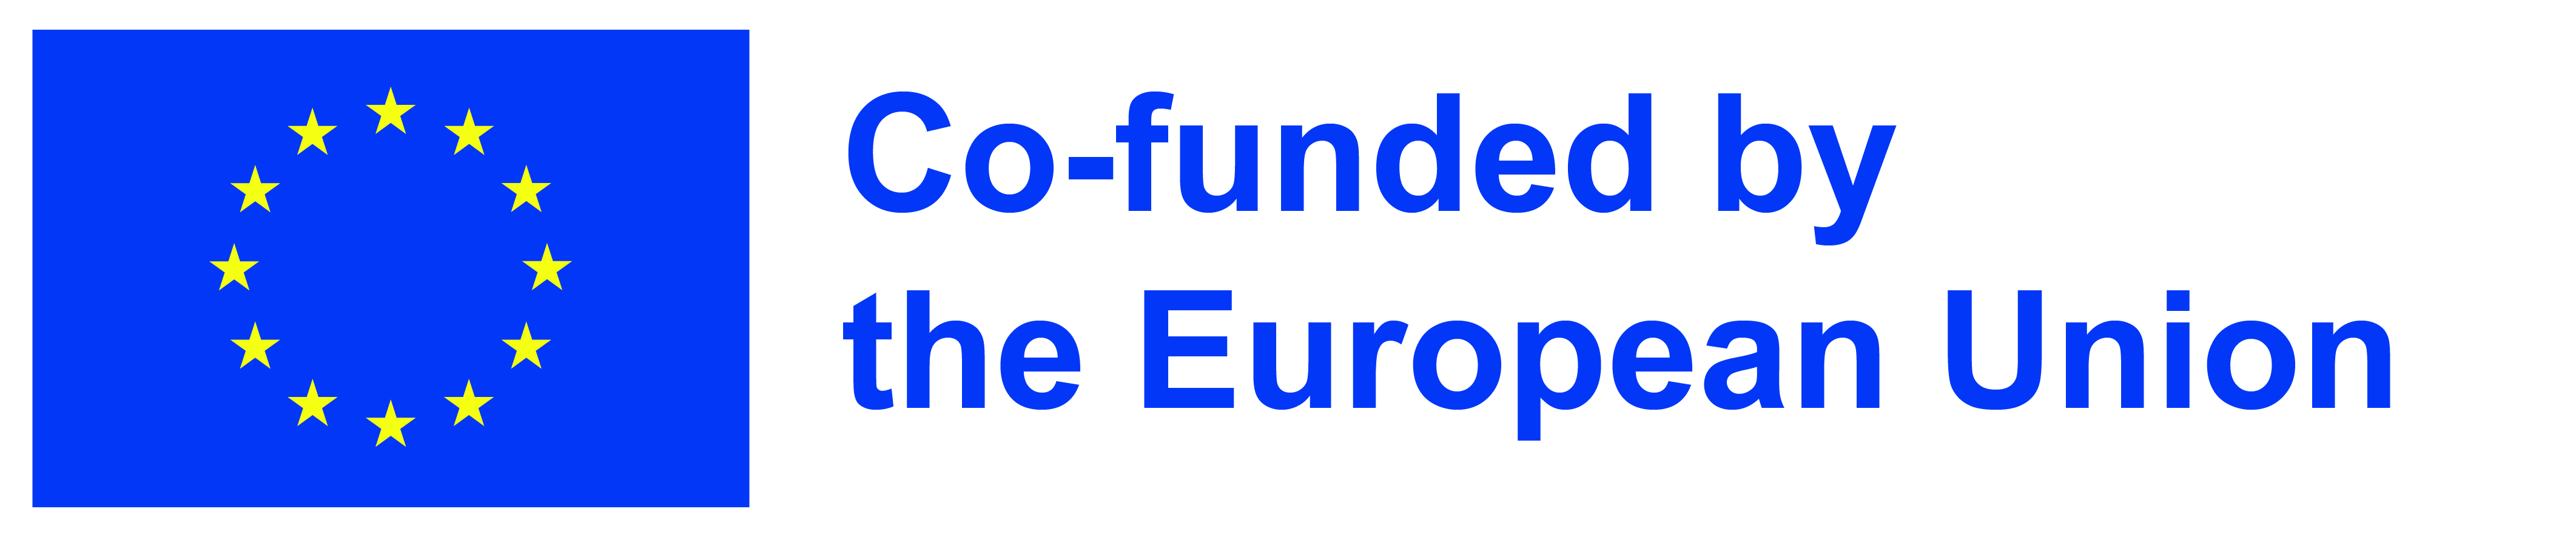 Co-funded by the EU_